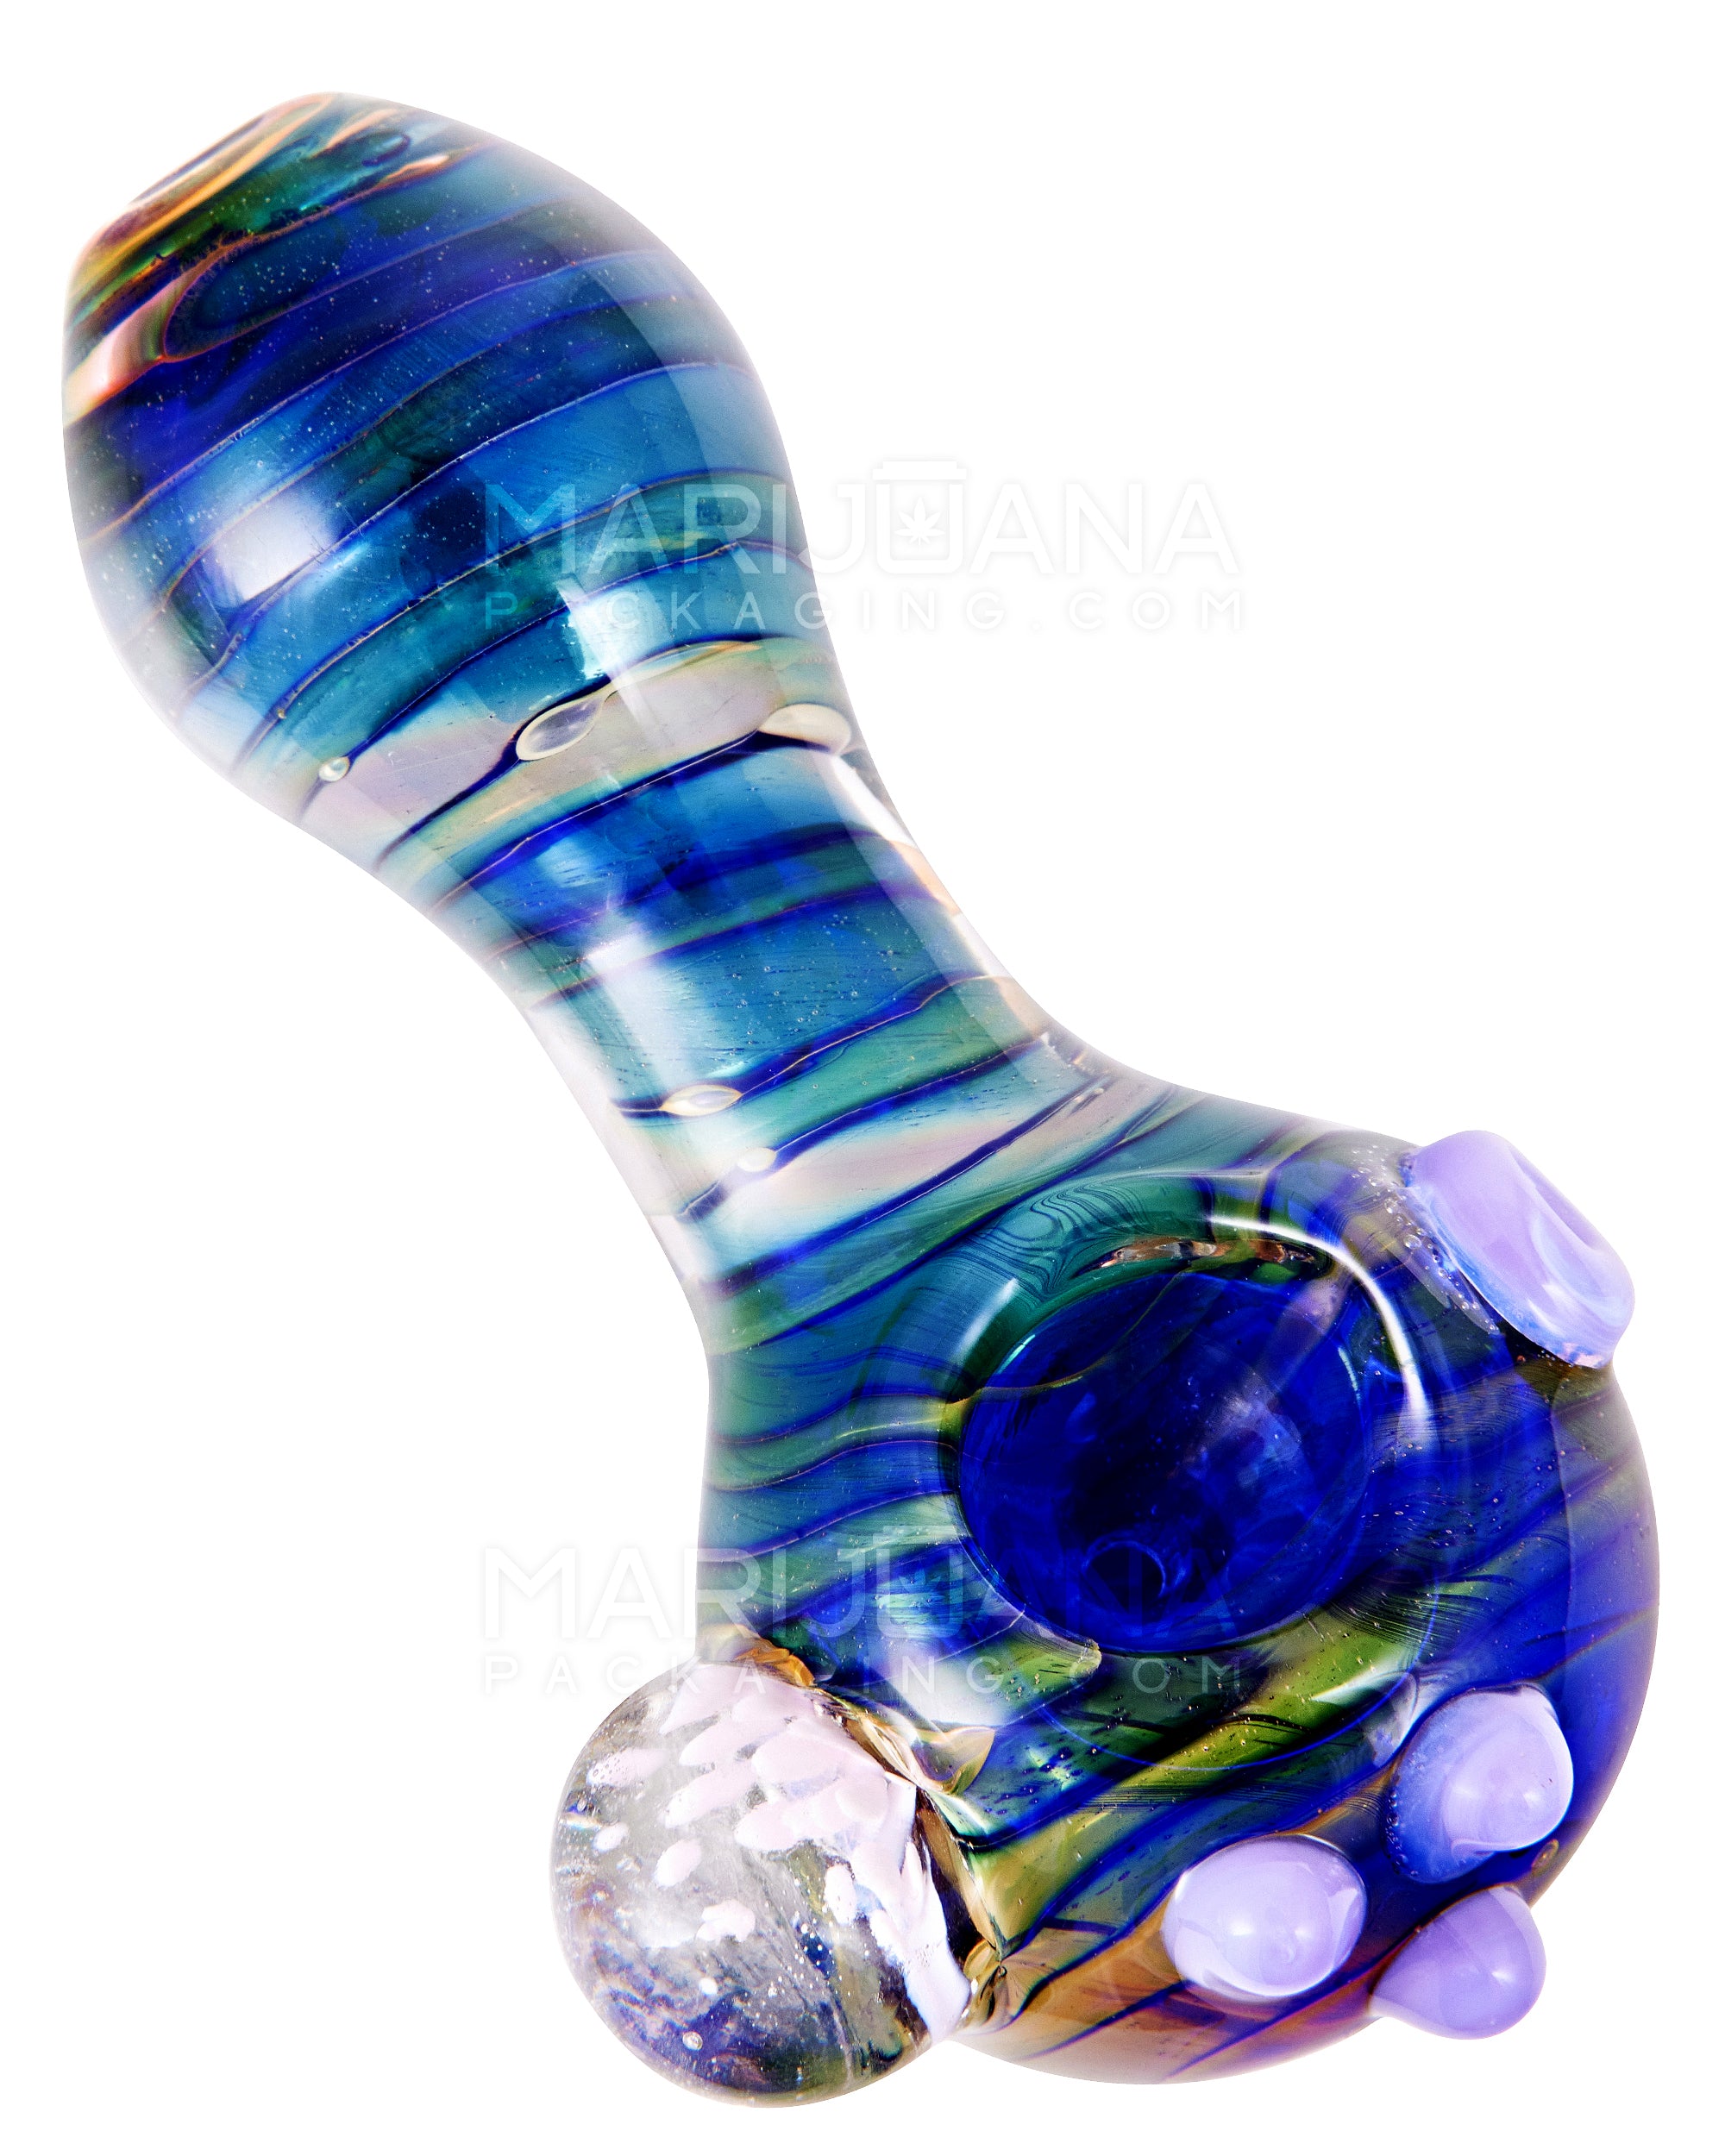 Fumed & Spiral Spoon Hand Pipe w/ Flower Implosion Marble & Triple Knockers | 4.5in Long - Glass - Assorted - 6